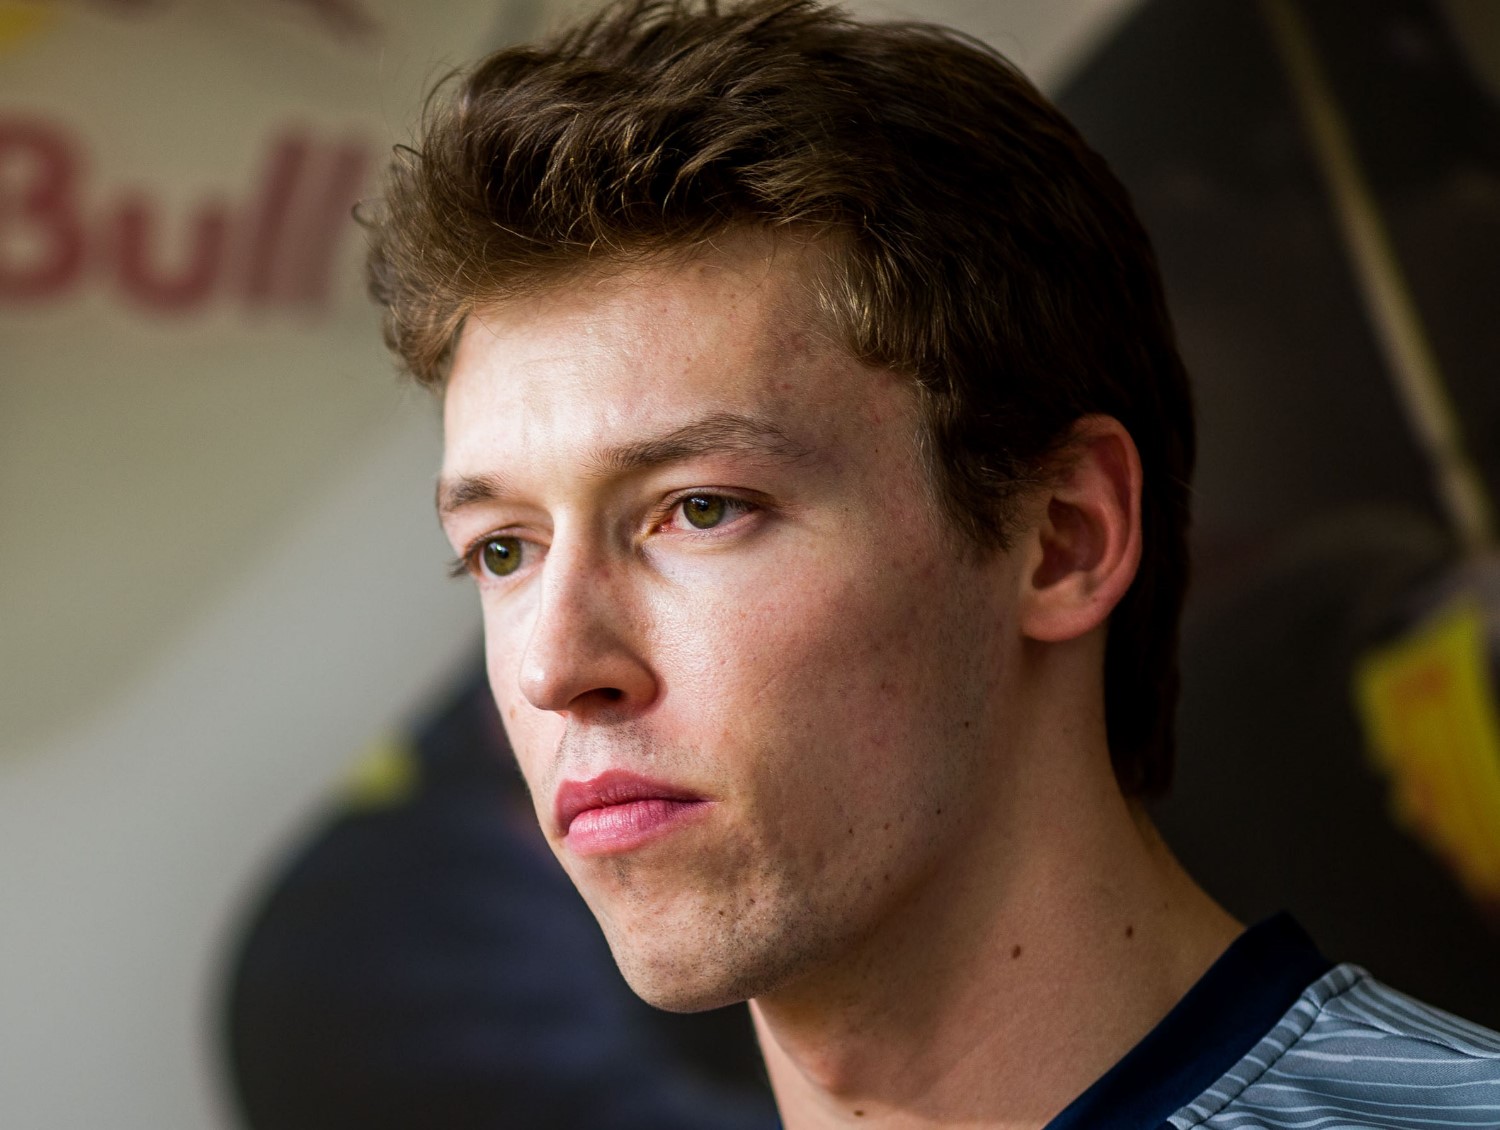 Kvyat might return in 2017 if his checks start flowing to Toro Rosso again